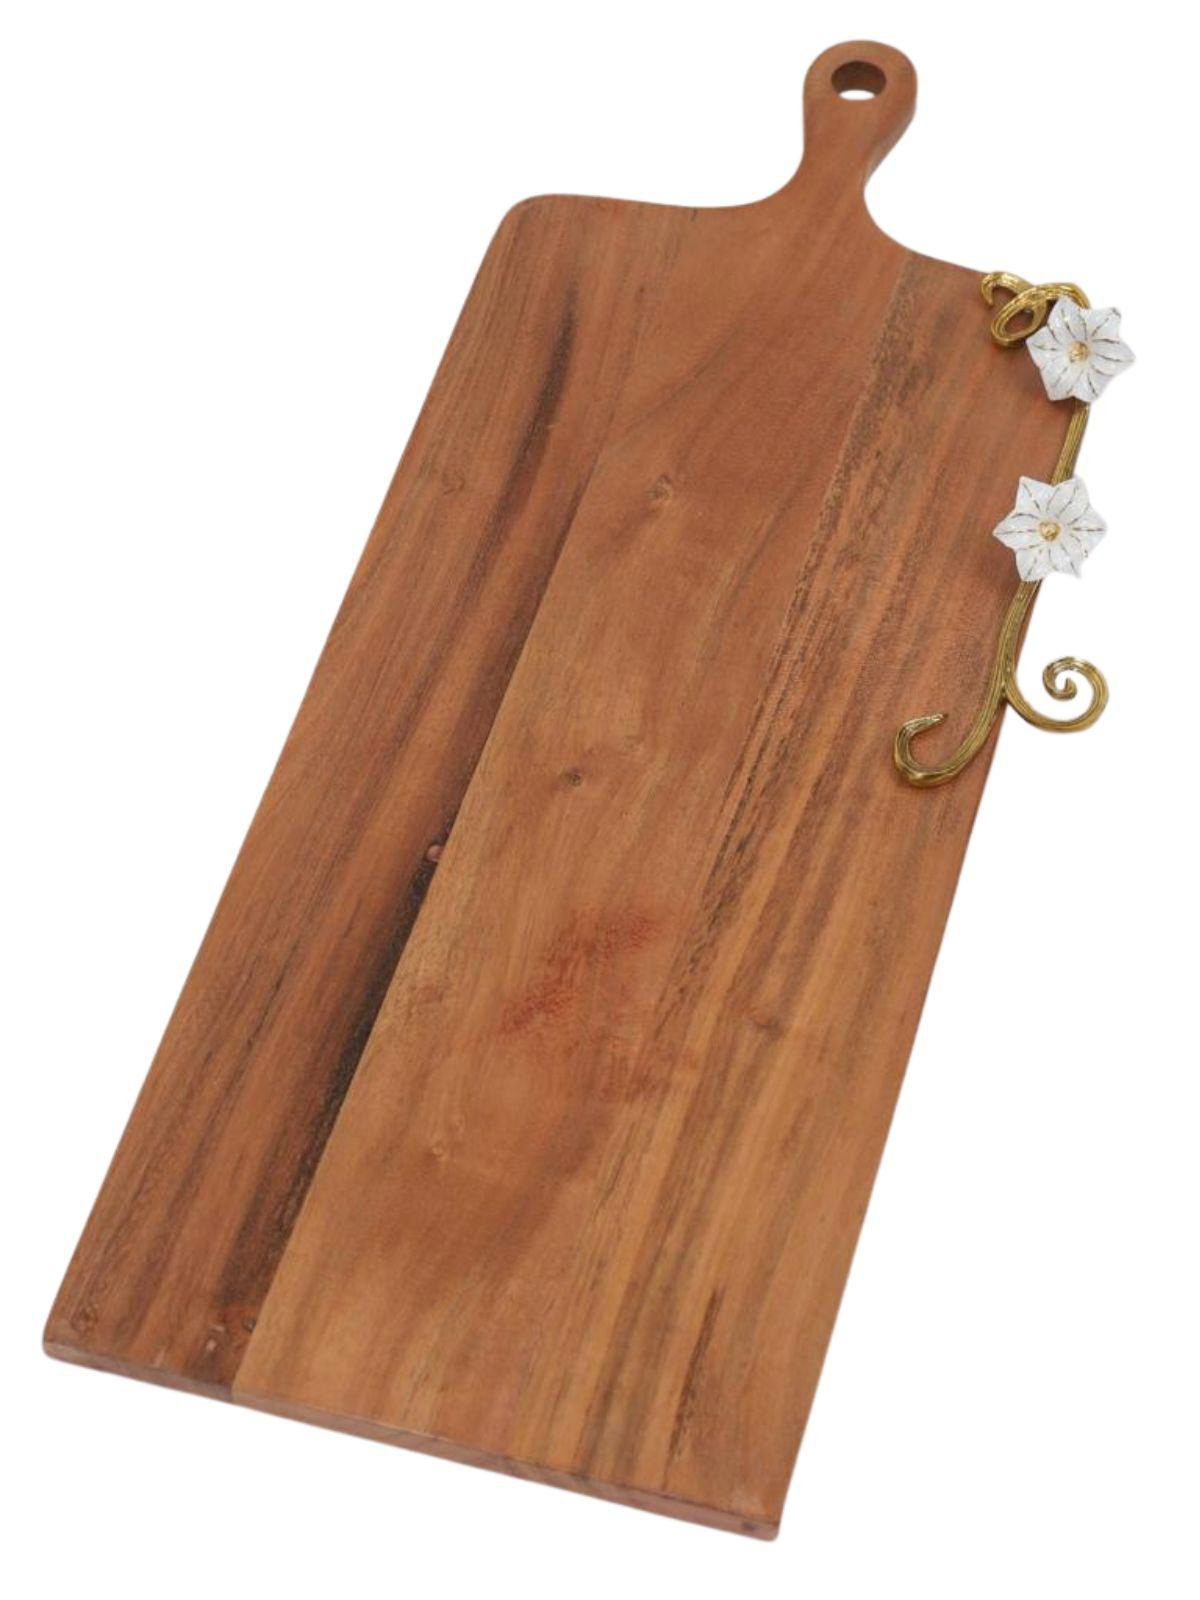 Luxurious Wood Charcuterie Board with White Lotus Flower Design and Handle, 24L X 9W.